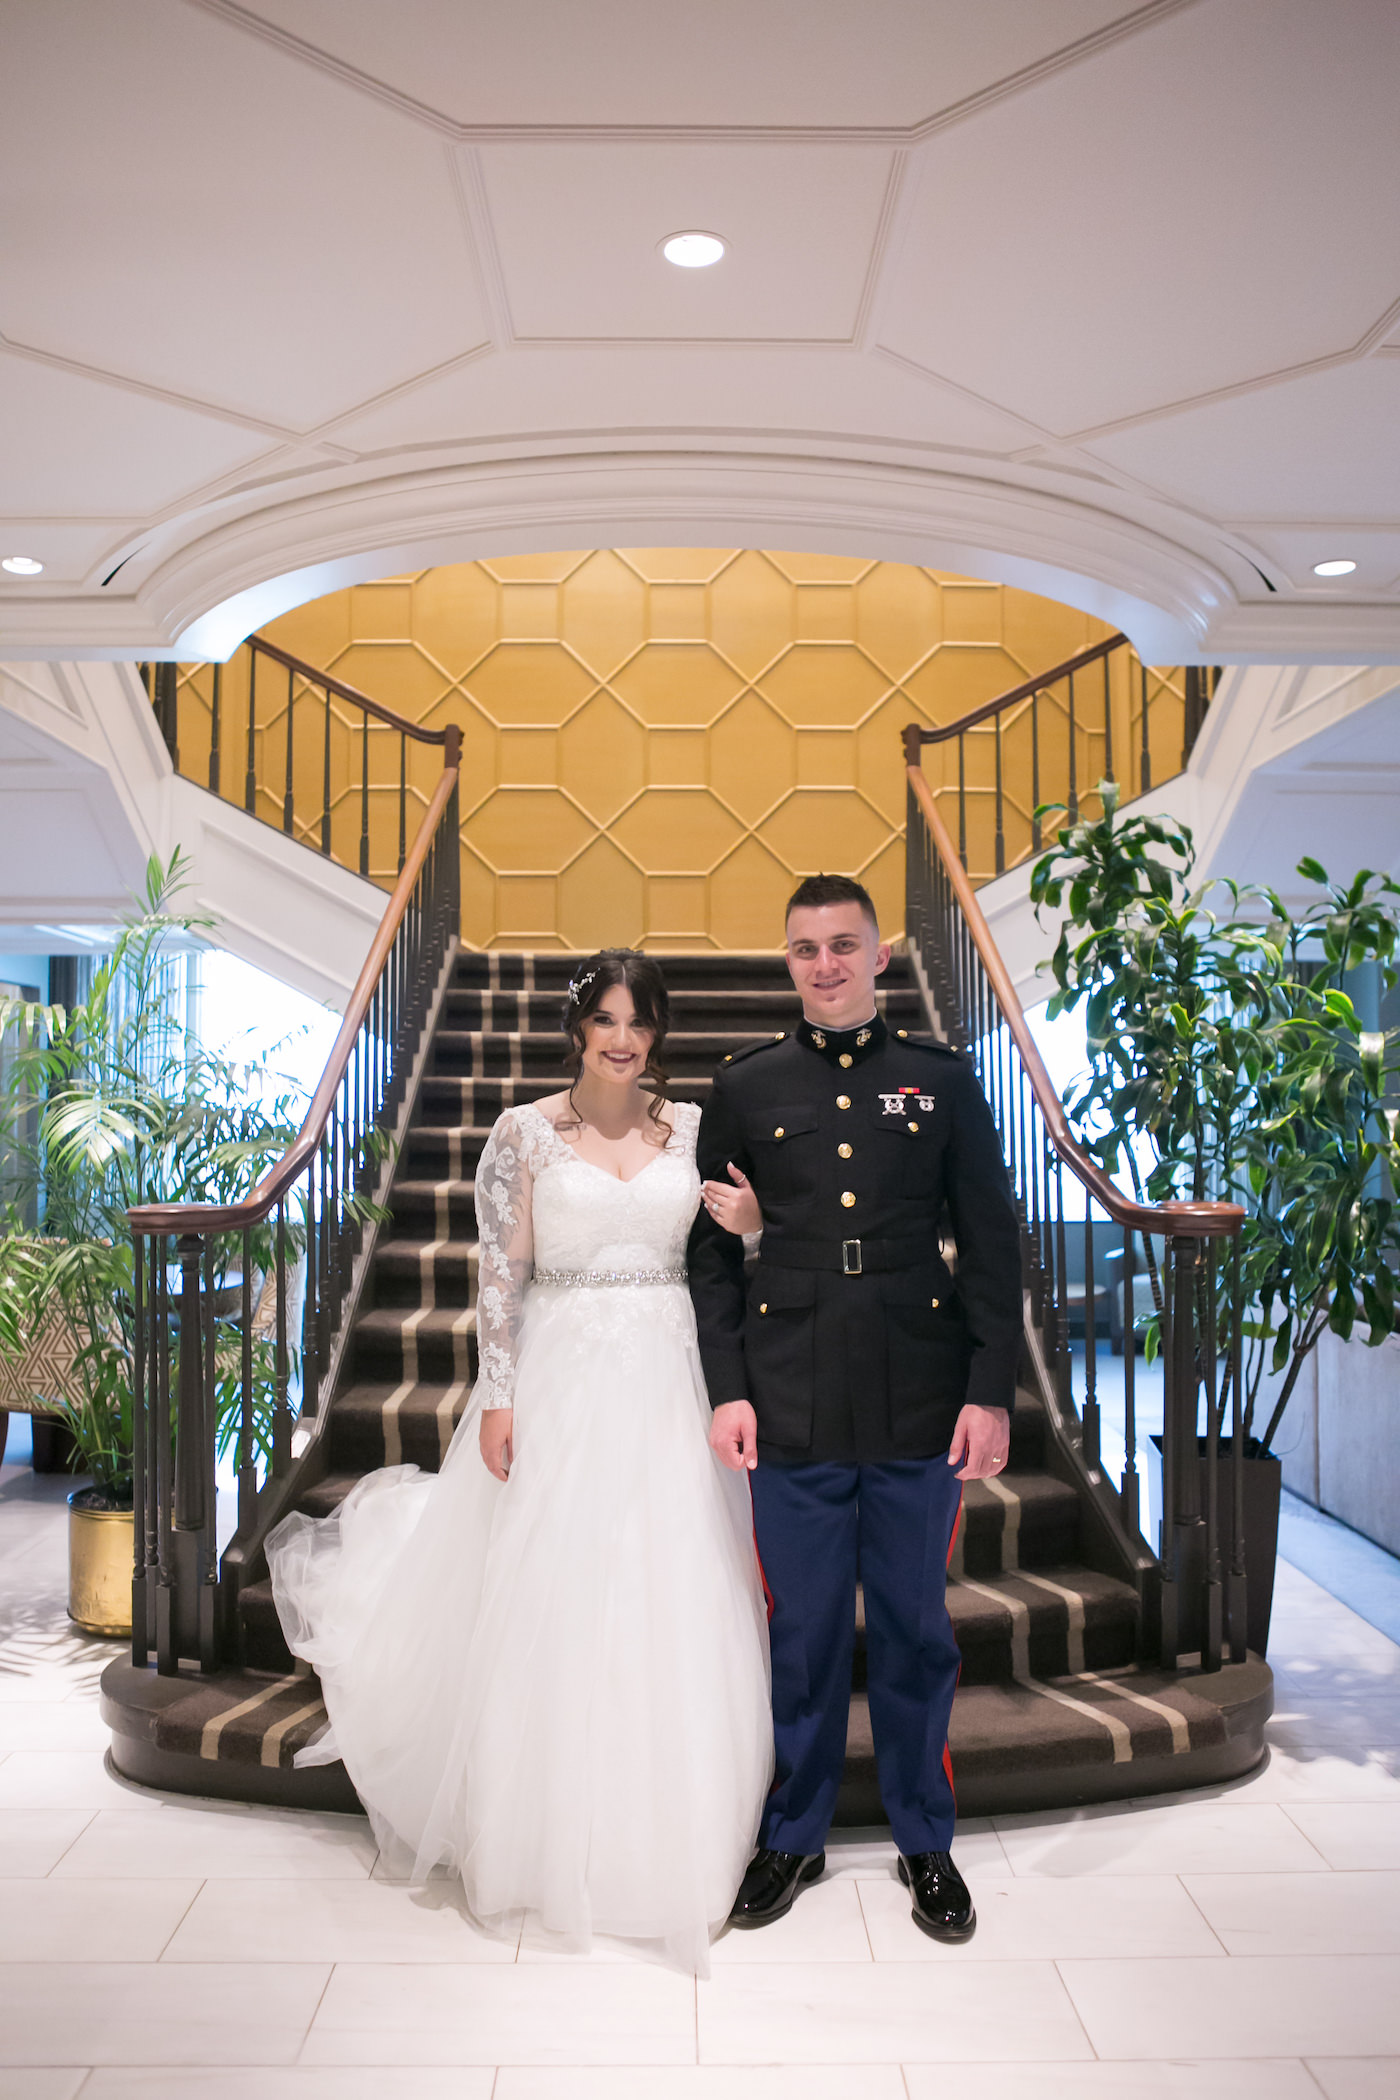 Florida Bride and Military Groom in Dress Blues Uniform Portrait at Wedding Venue The Tampa Club | Wedding Photographer Carrie Wildes Photography